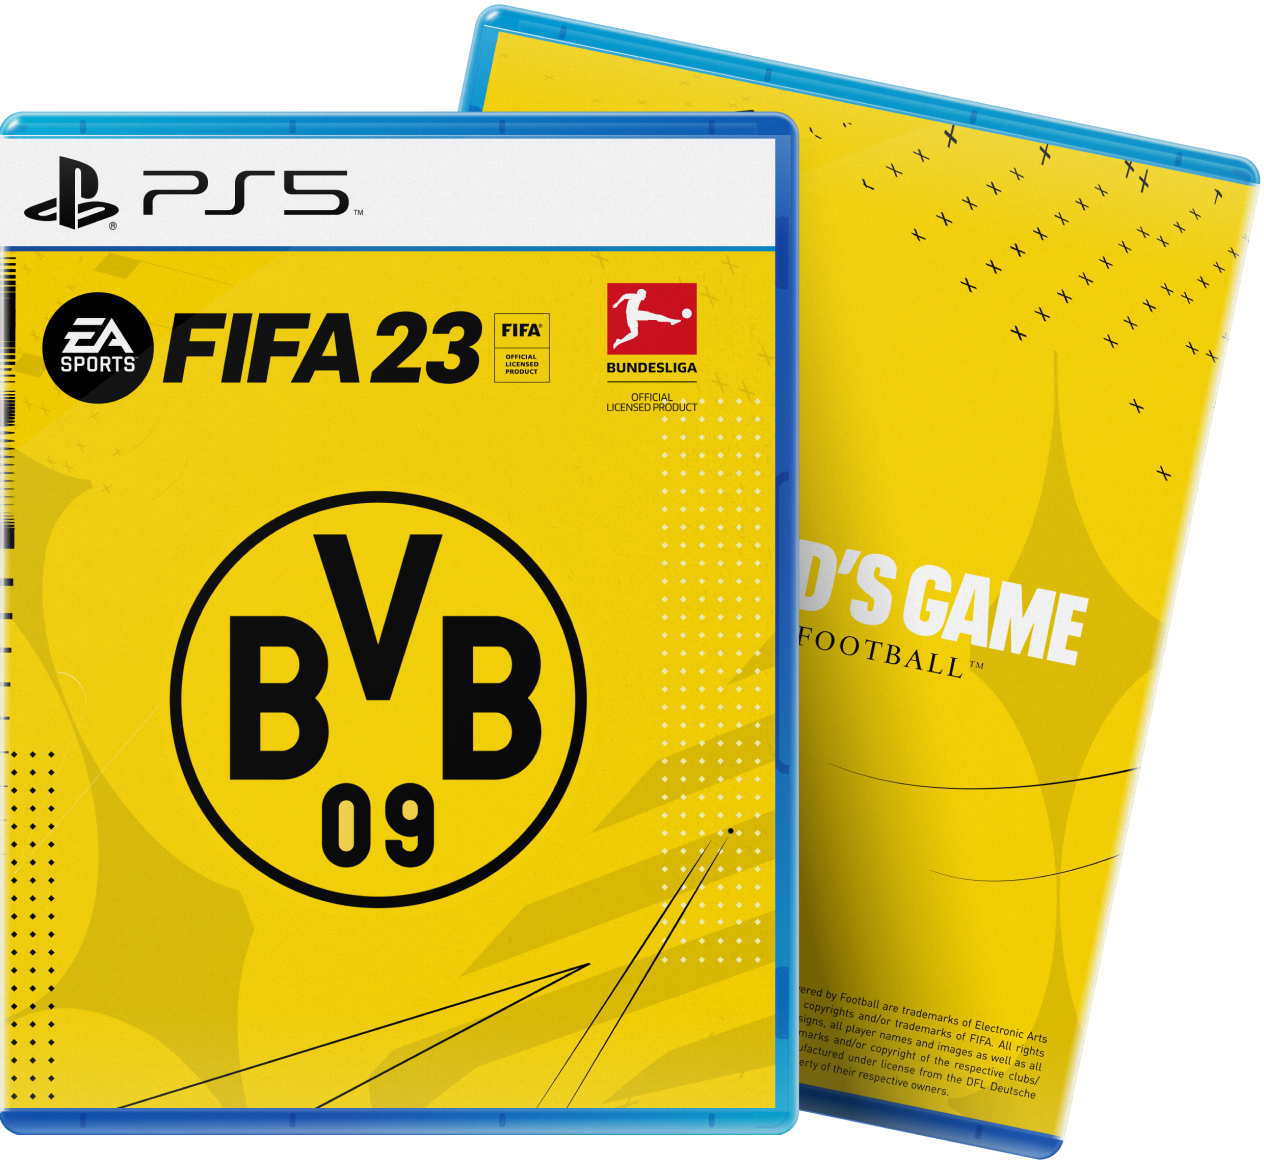 Steam sale pairs super cheap FIFA 23 with free stickers